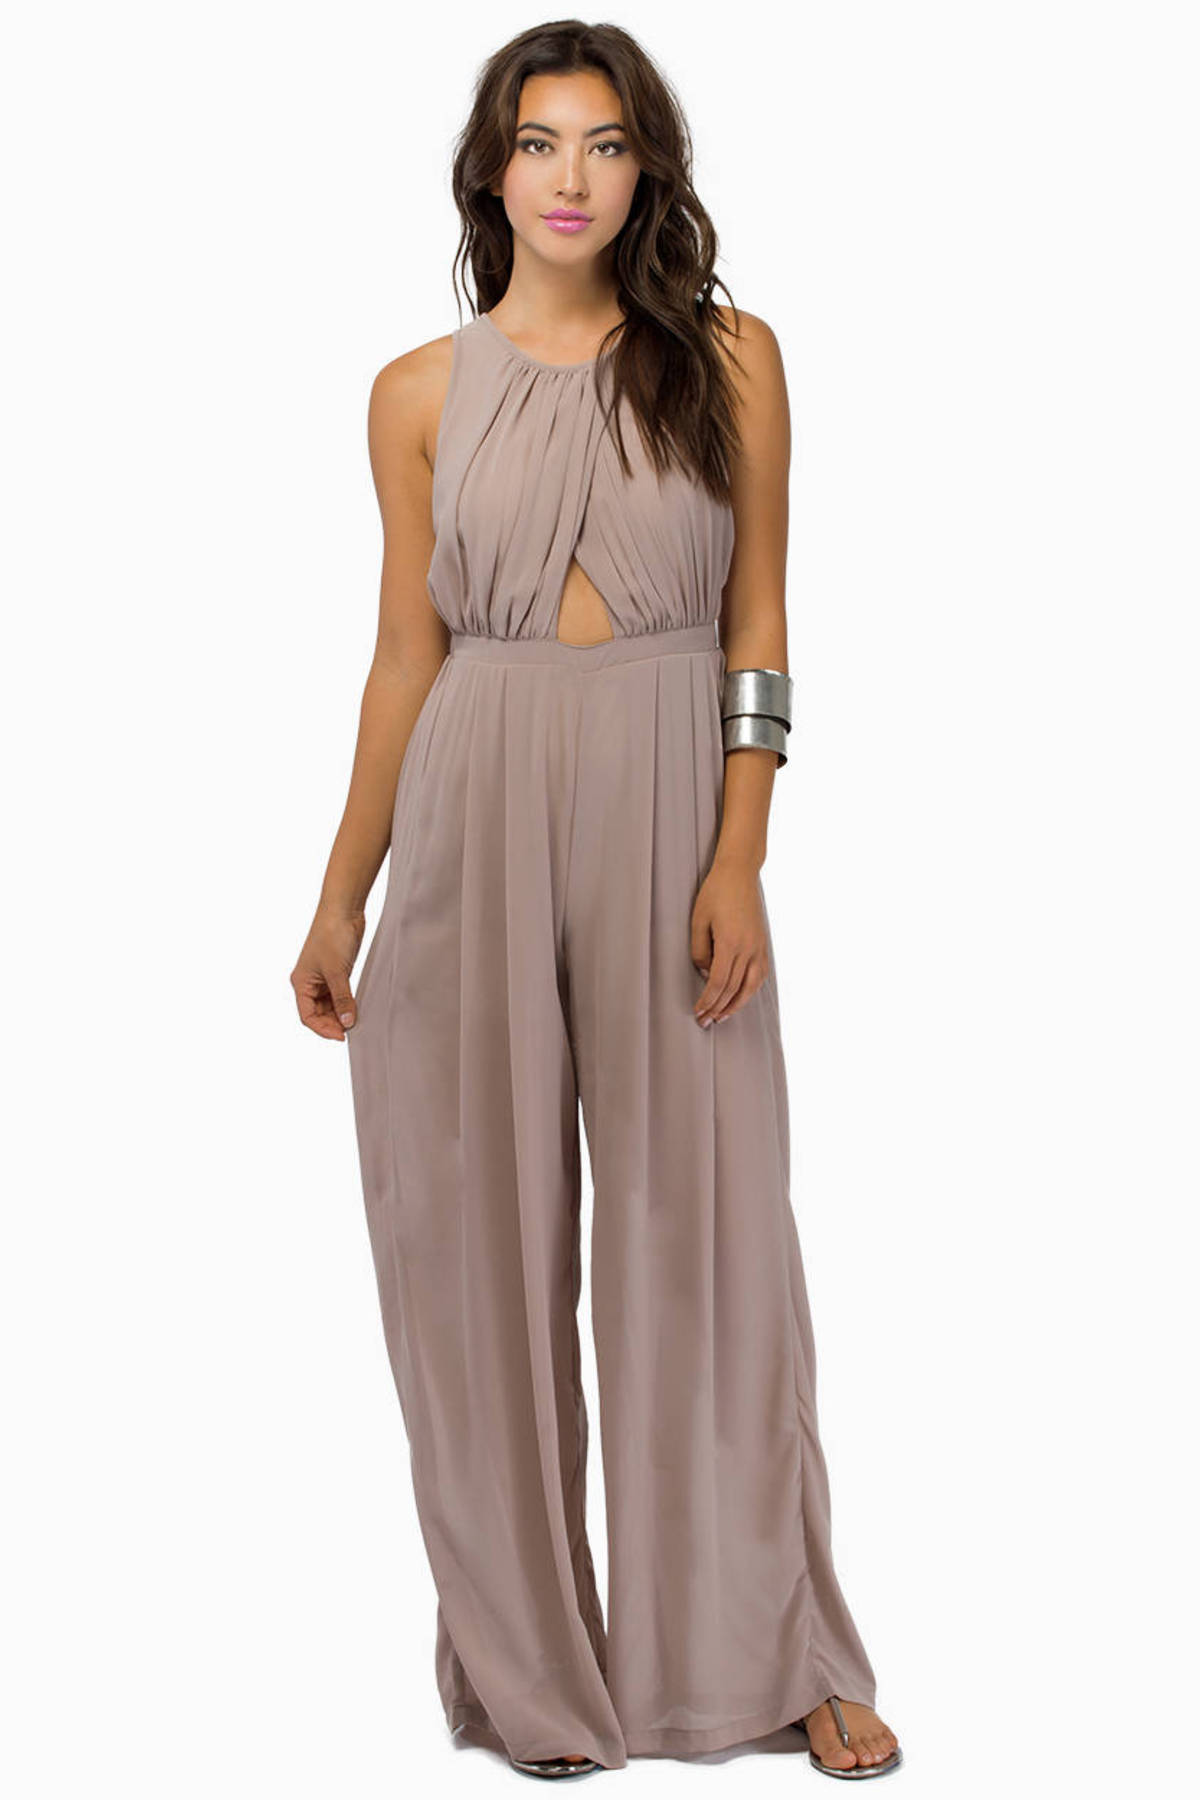 First Date Jumpsuit in Toast - $30 | Tobi US